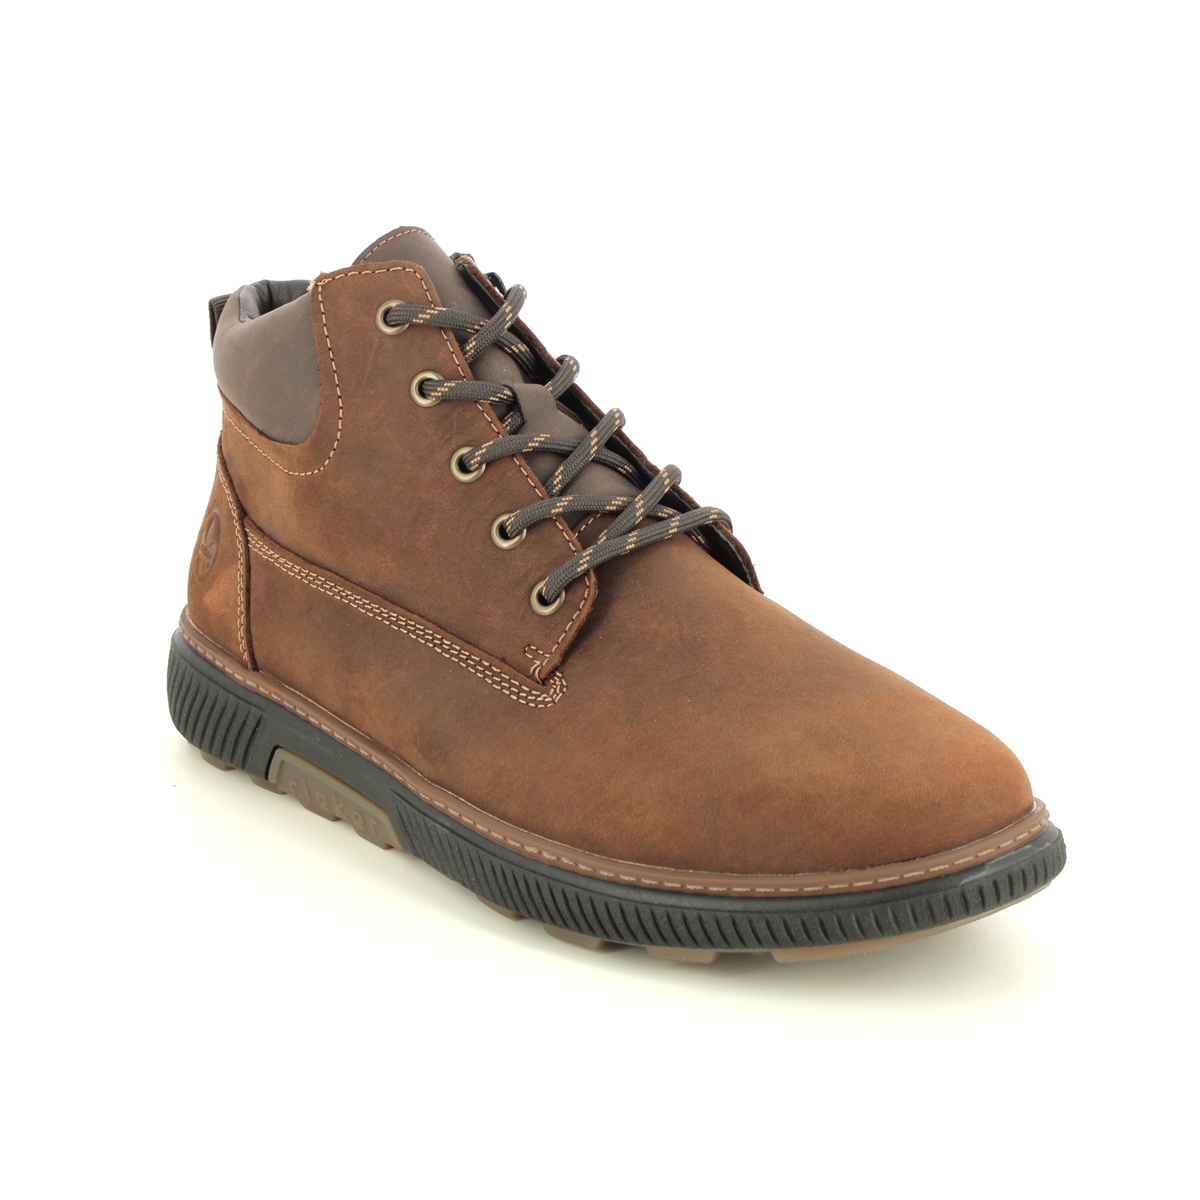 Rieker Prambola Brown Suede Mens Chukka Boots B3312-22 In Size 44 In Plain Brown Suede